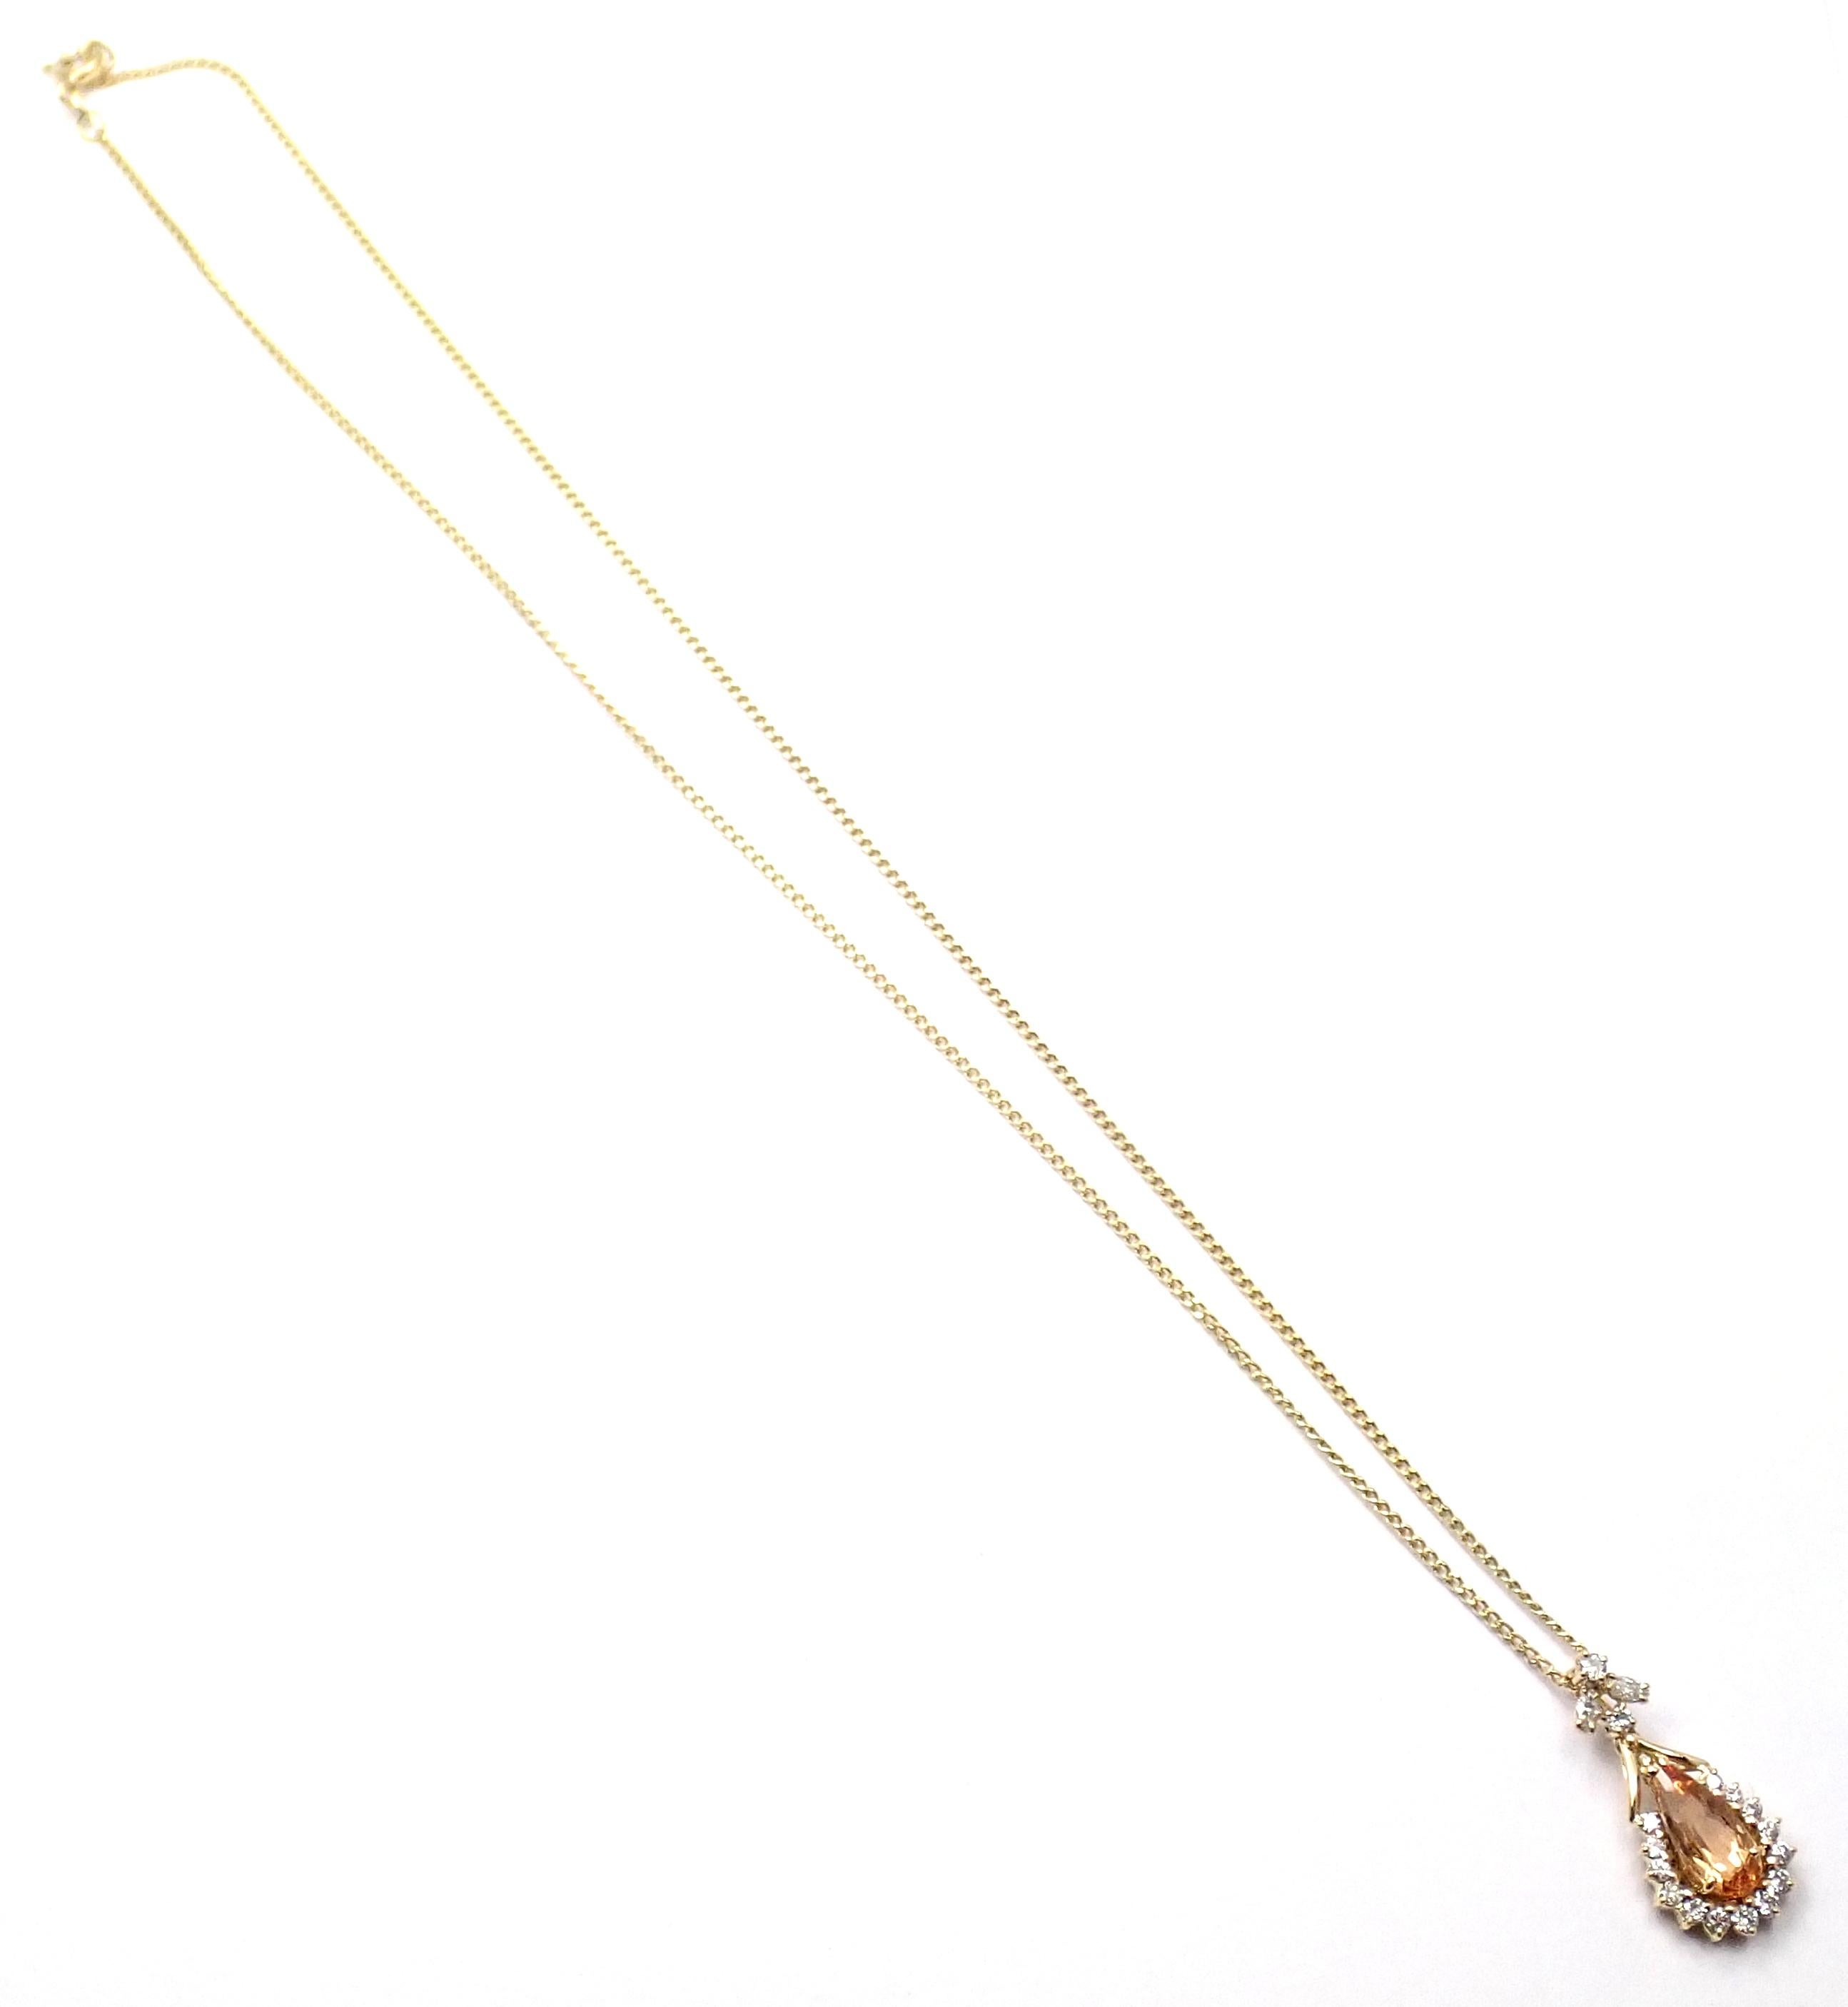 Women's or Men's H. Stern Diamond Imperial Topaz Yellow Gold Pendant Necklace